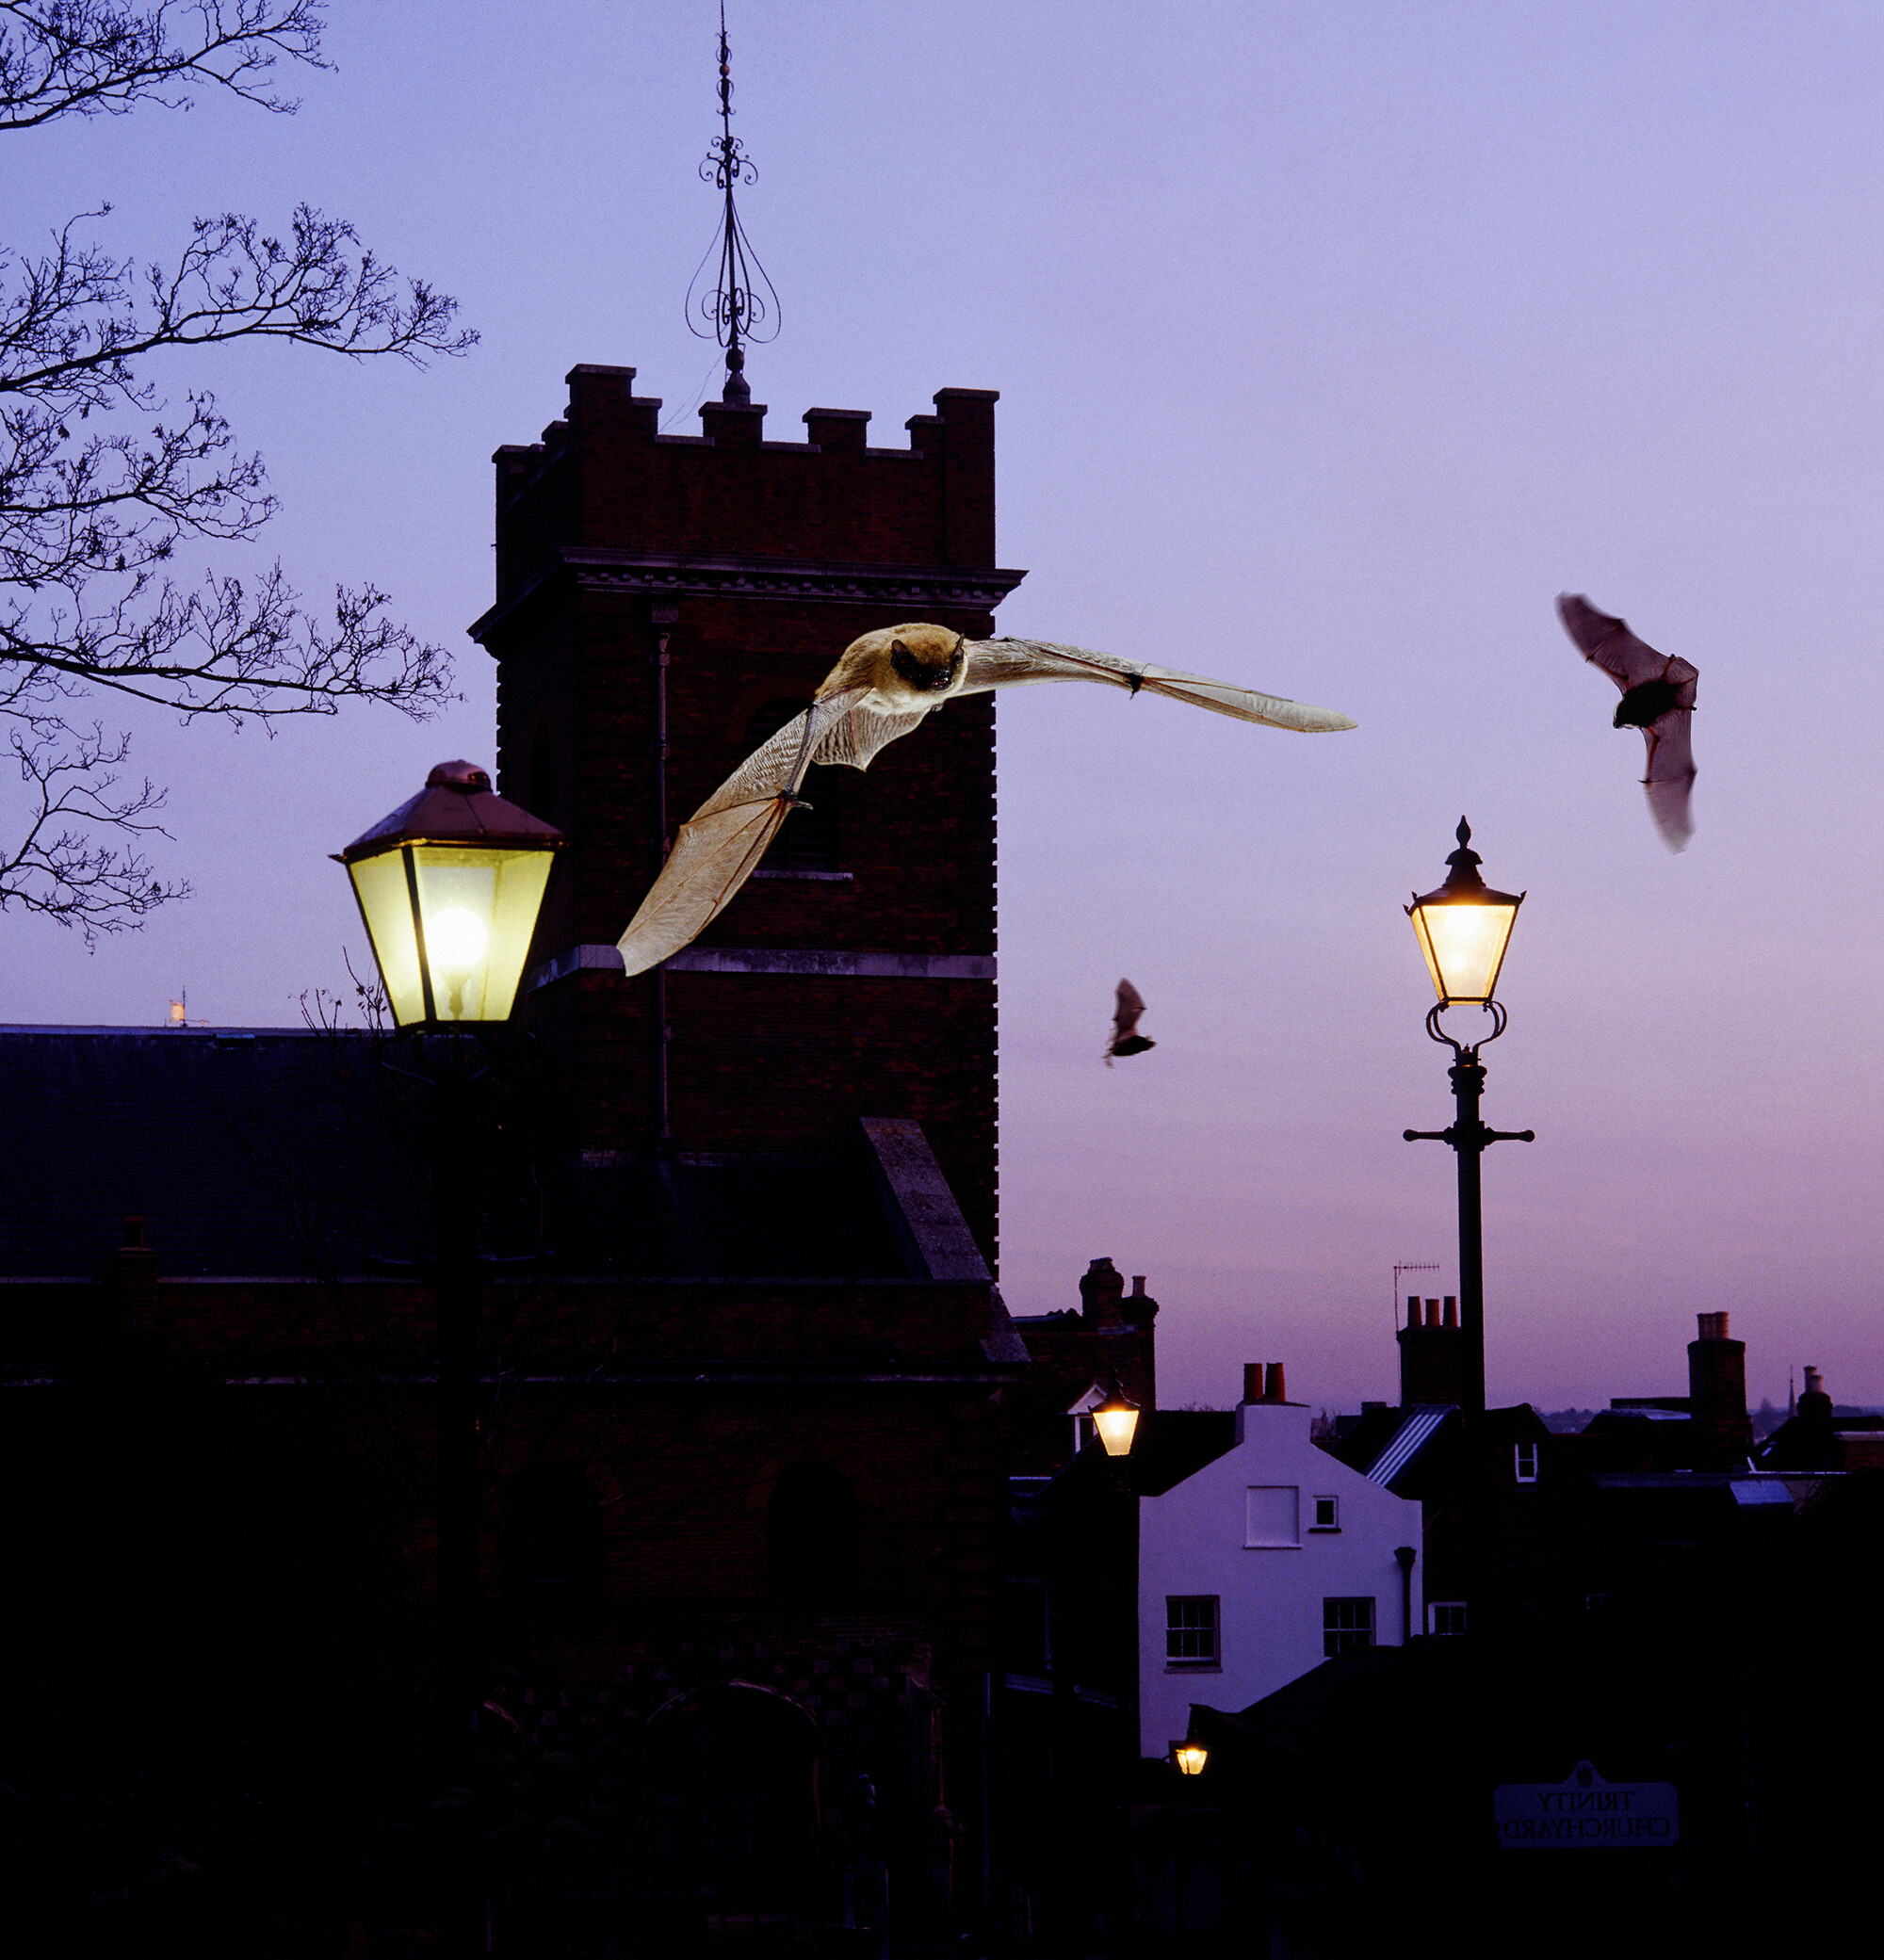 Bats flying around buildings during dusk or dawn. The buildings are lit up with traditional lamps. A church tower dominates the scene.